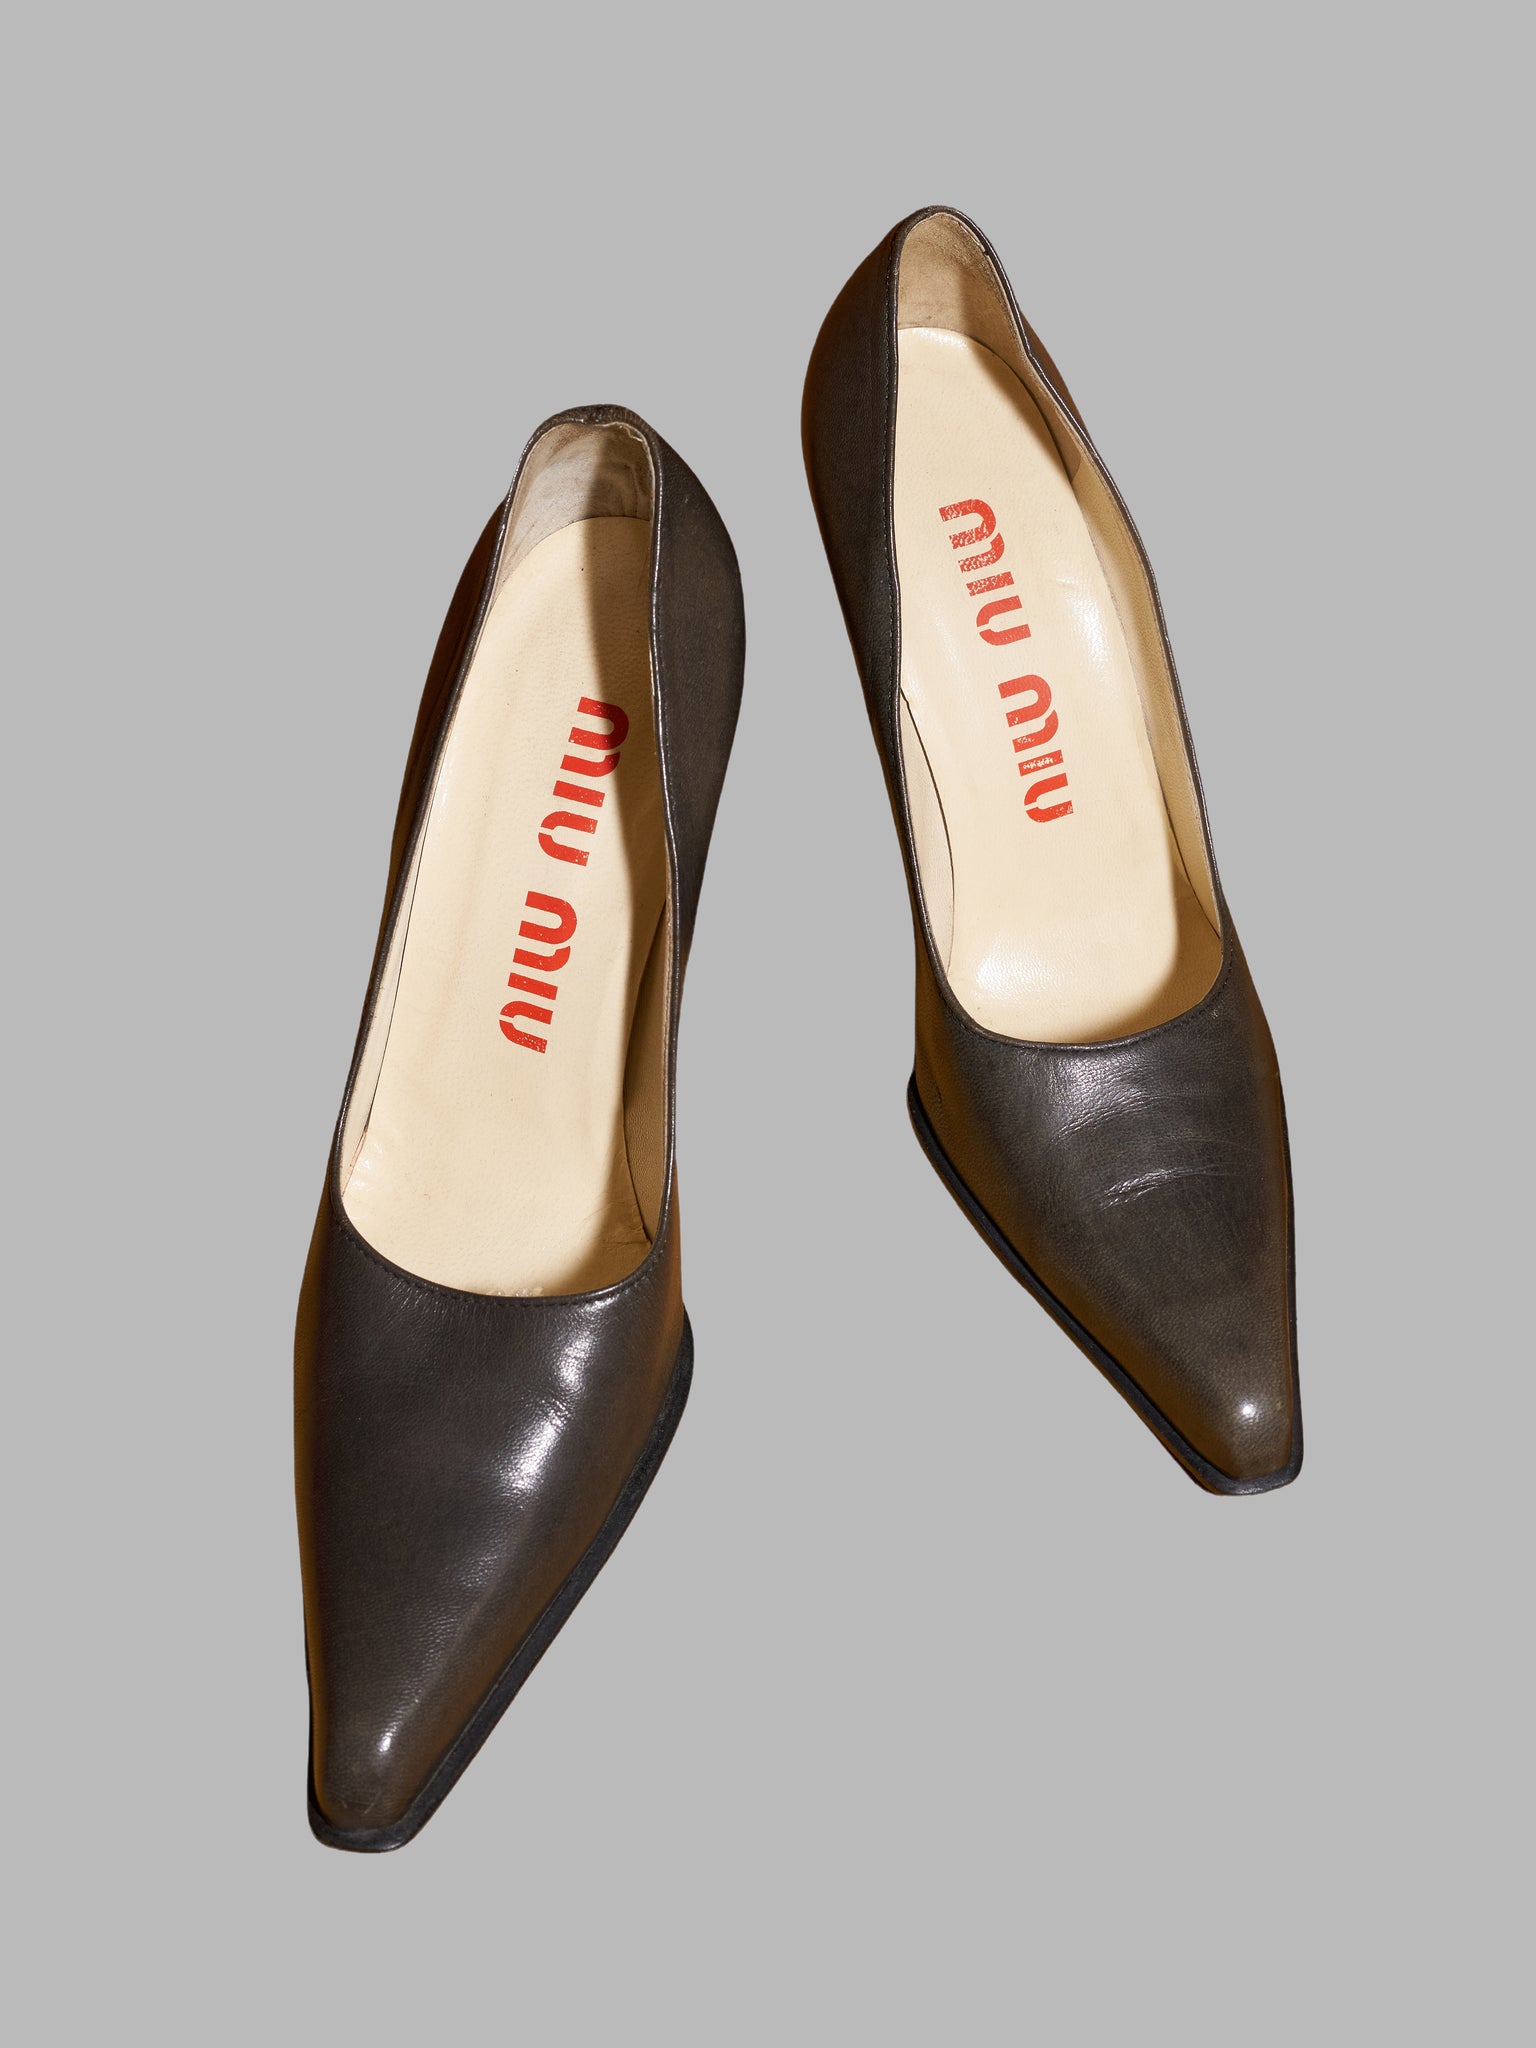 Miu Miu 1990s grey-y brown leather pointed toe high heel shoes - size 37 1/2